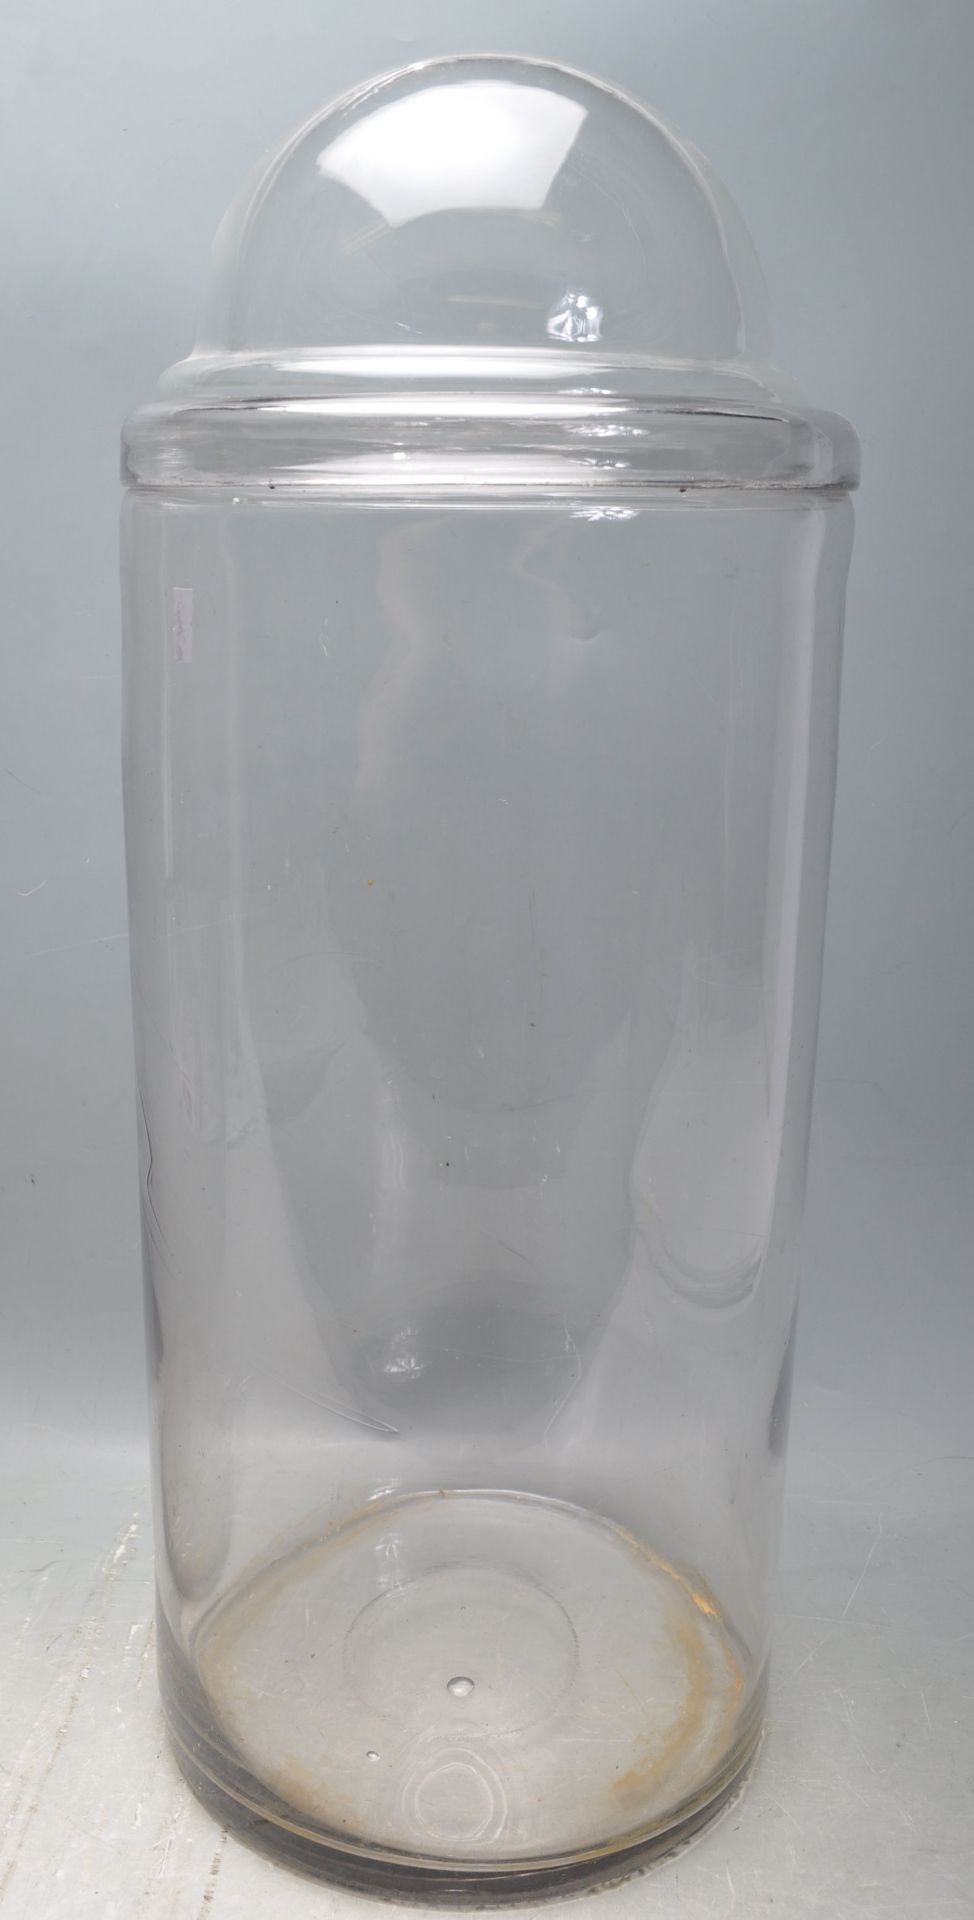 TWO LARGE VINTAGE RETRO 20TH CENTURY CLEAR GLASS CONFECTIONERY JARS - Image 3 of 4